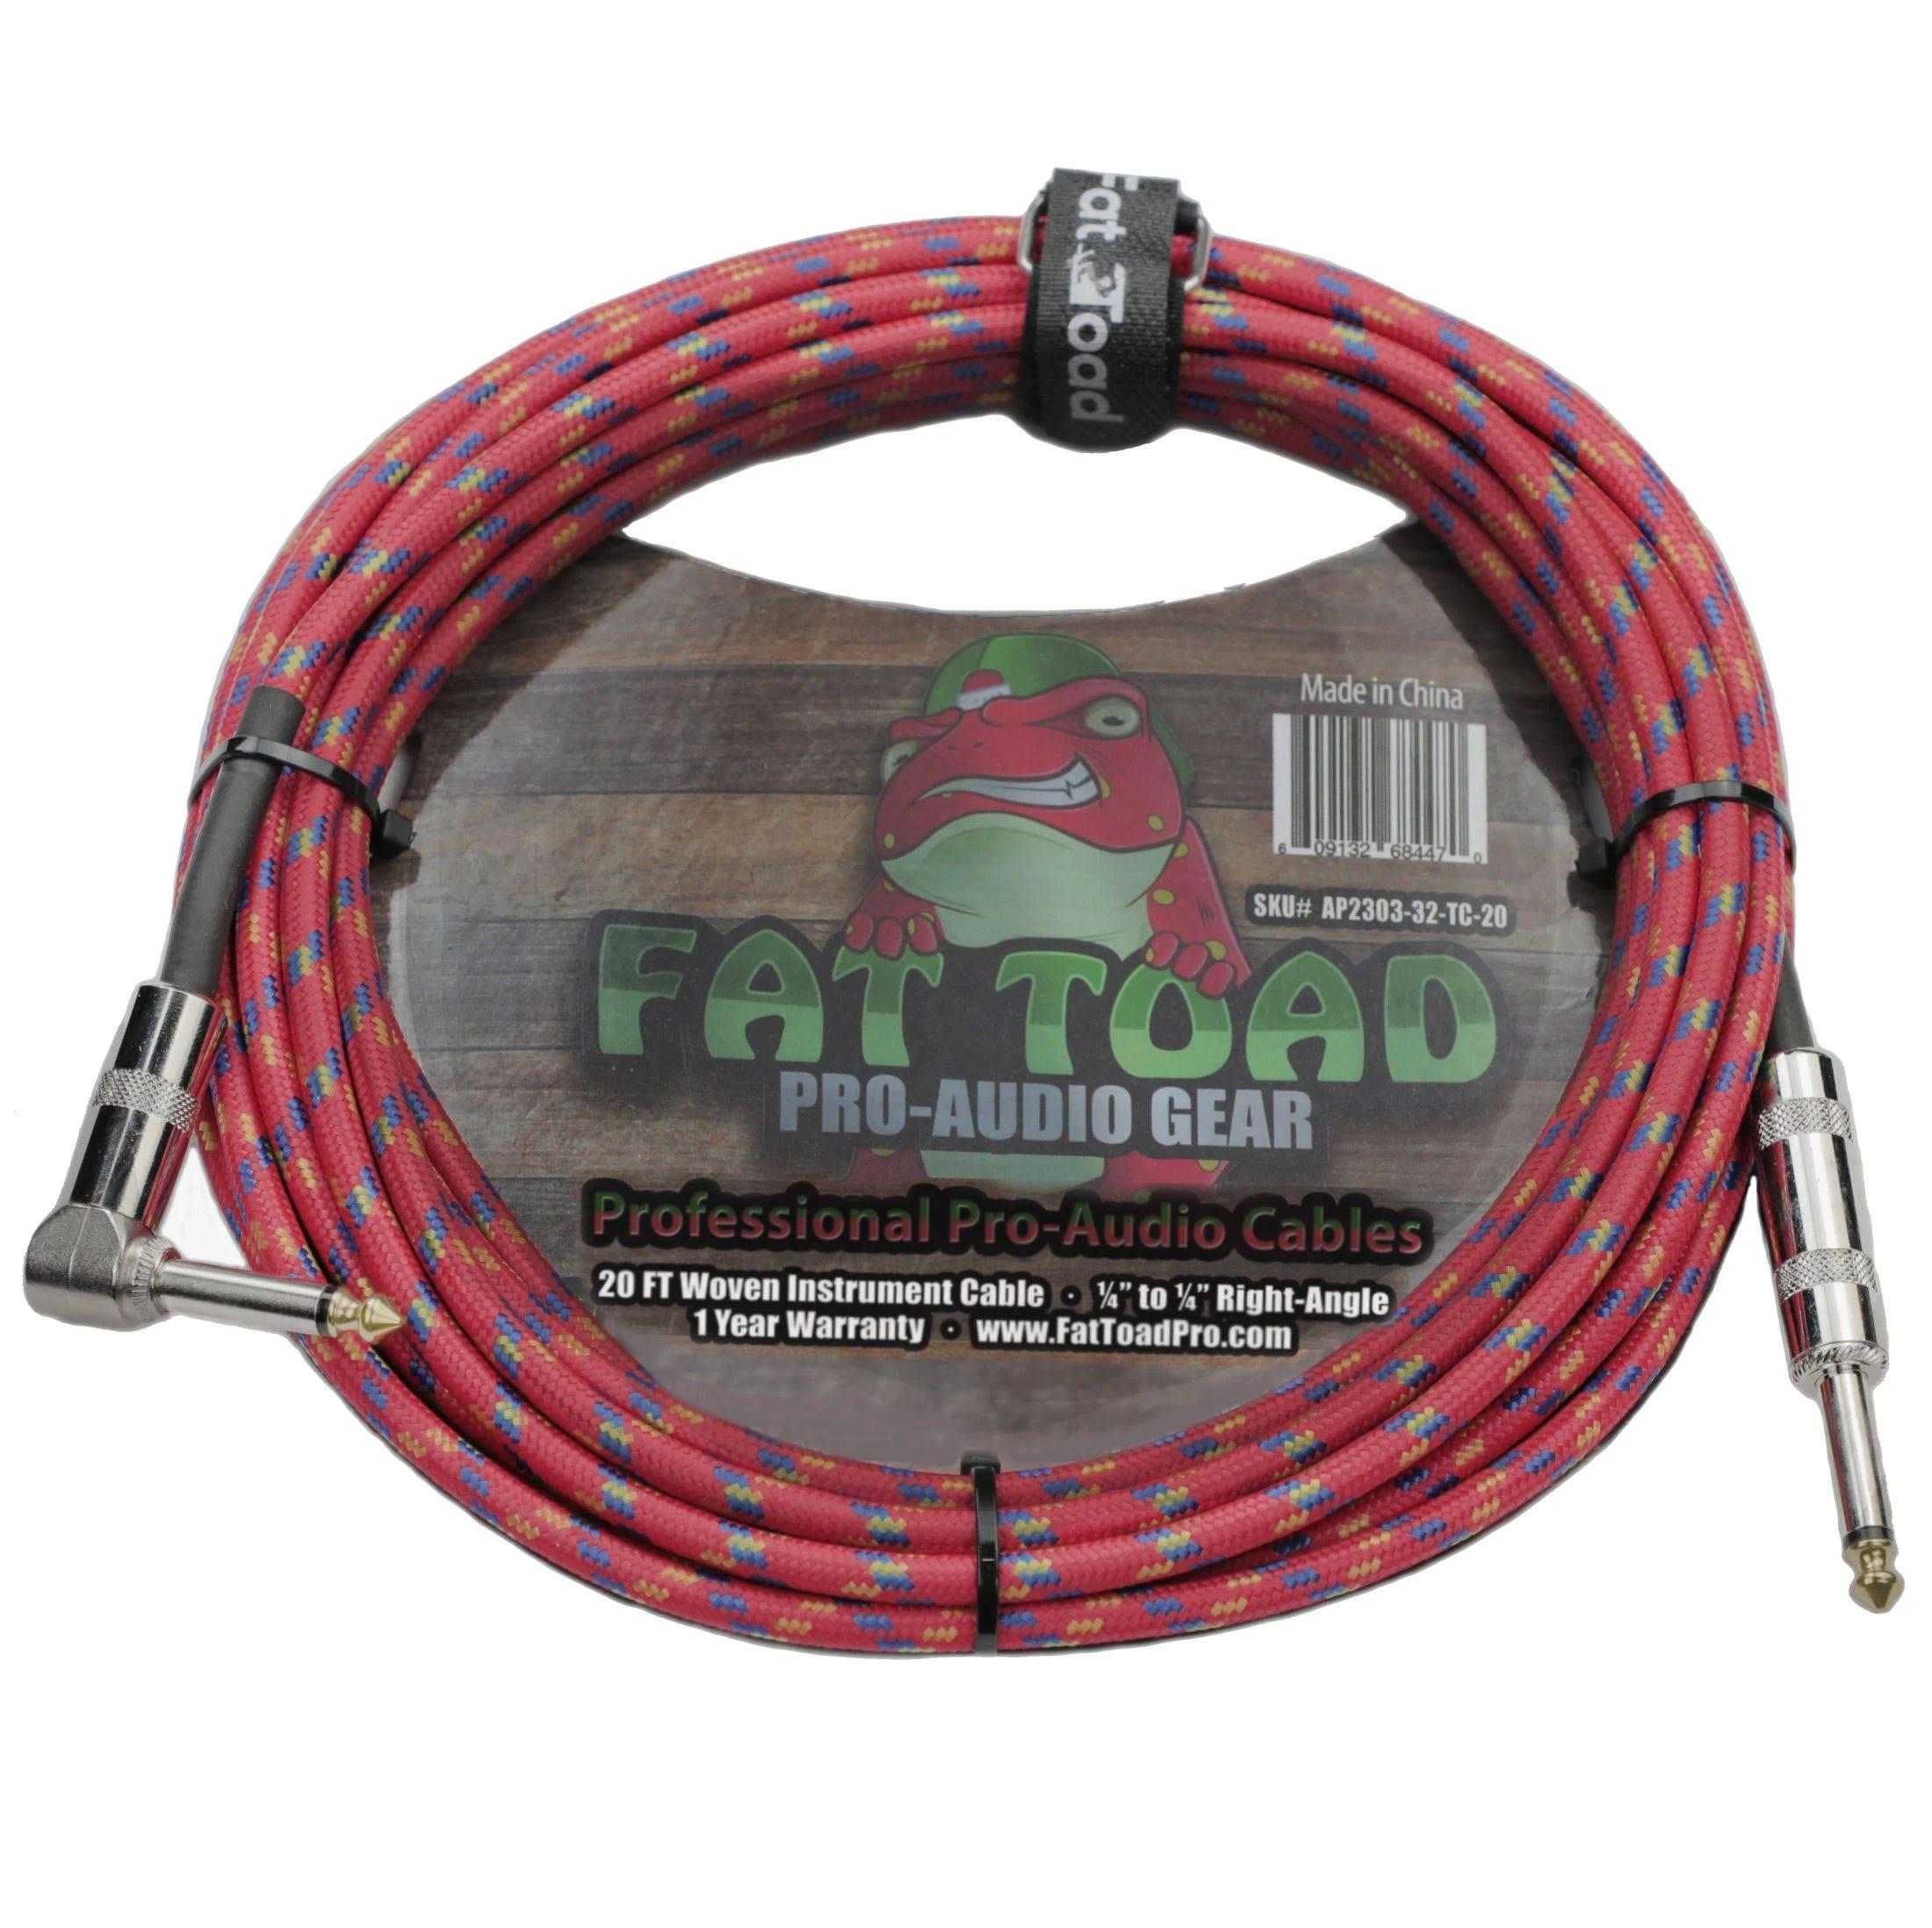 Tweed Cloth Woven Guitar Cable for Reliable Outdoor Performance | Image